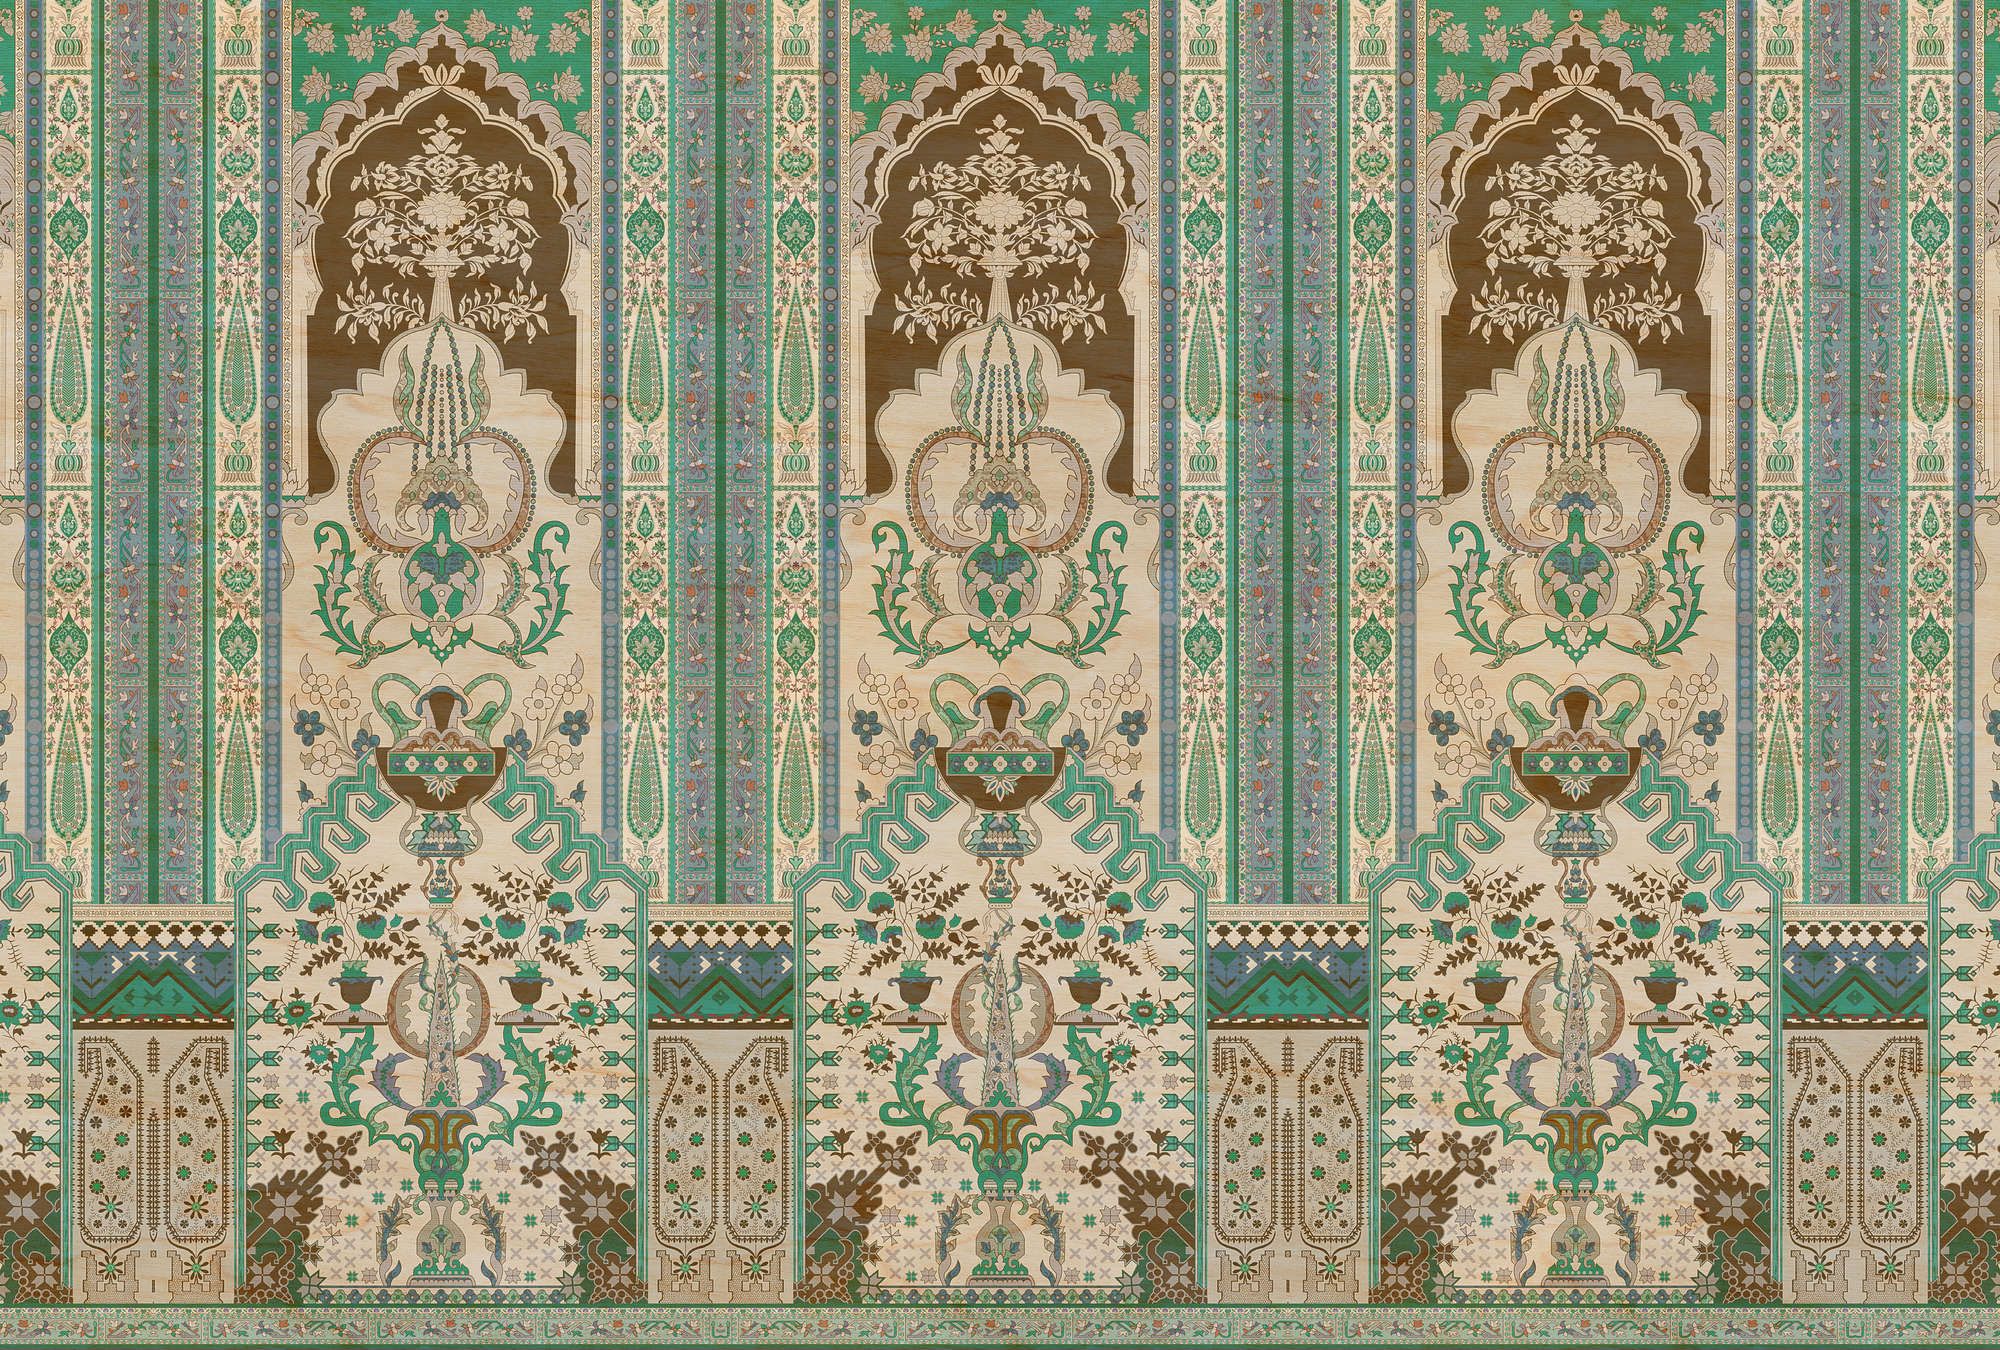             Photo wallpaper »tara« - Ornamental panelling with plywood texture - Green, beige | Smooth, slightly shiny premium non-woven fabric
        